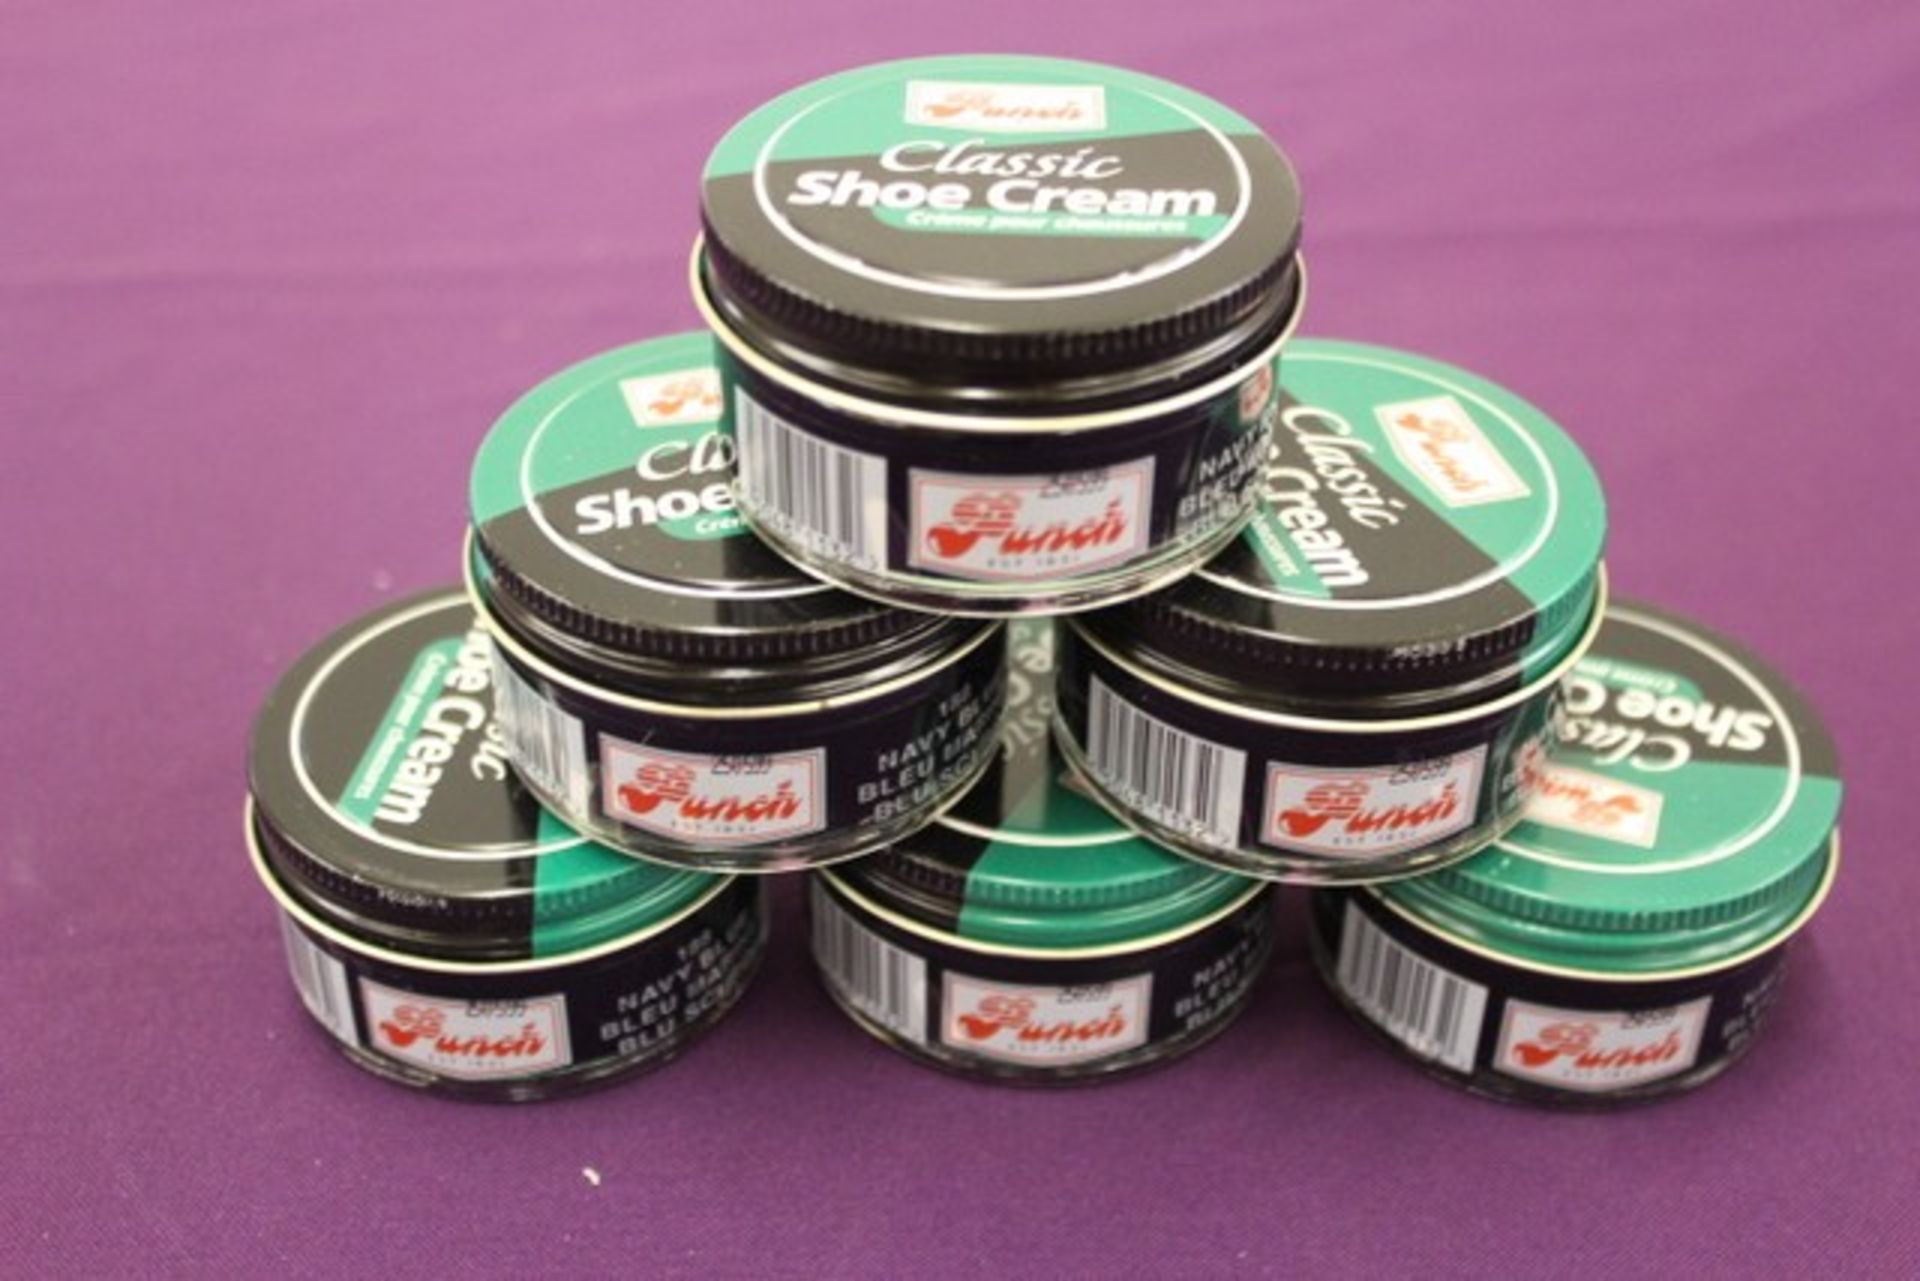 + VAT Brand New Six Jars Of 50ml Punch Classic Shoe Cream Navy Blue (Photo May Vary From Item)